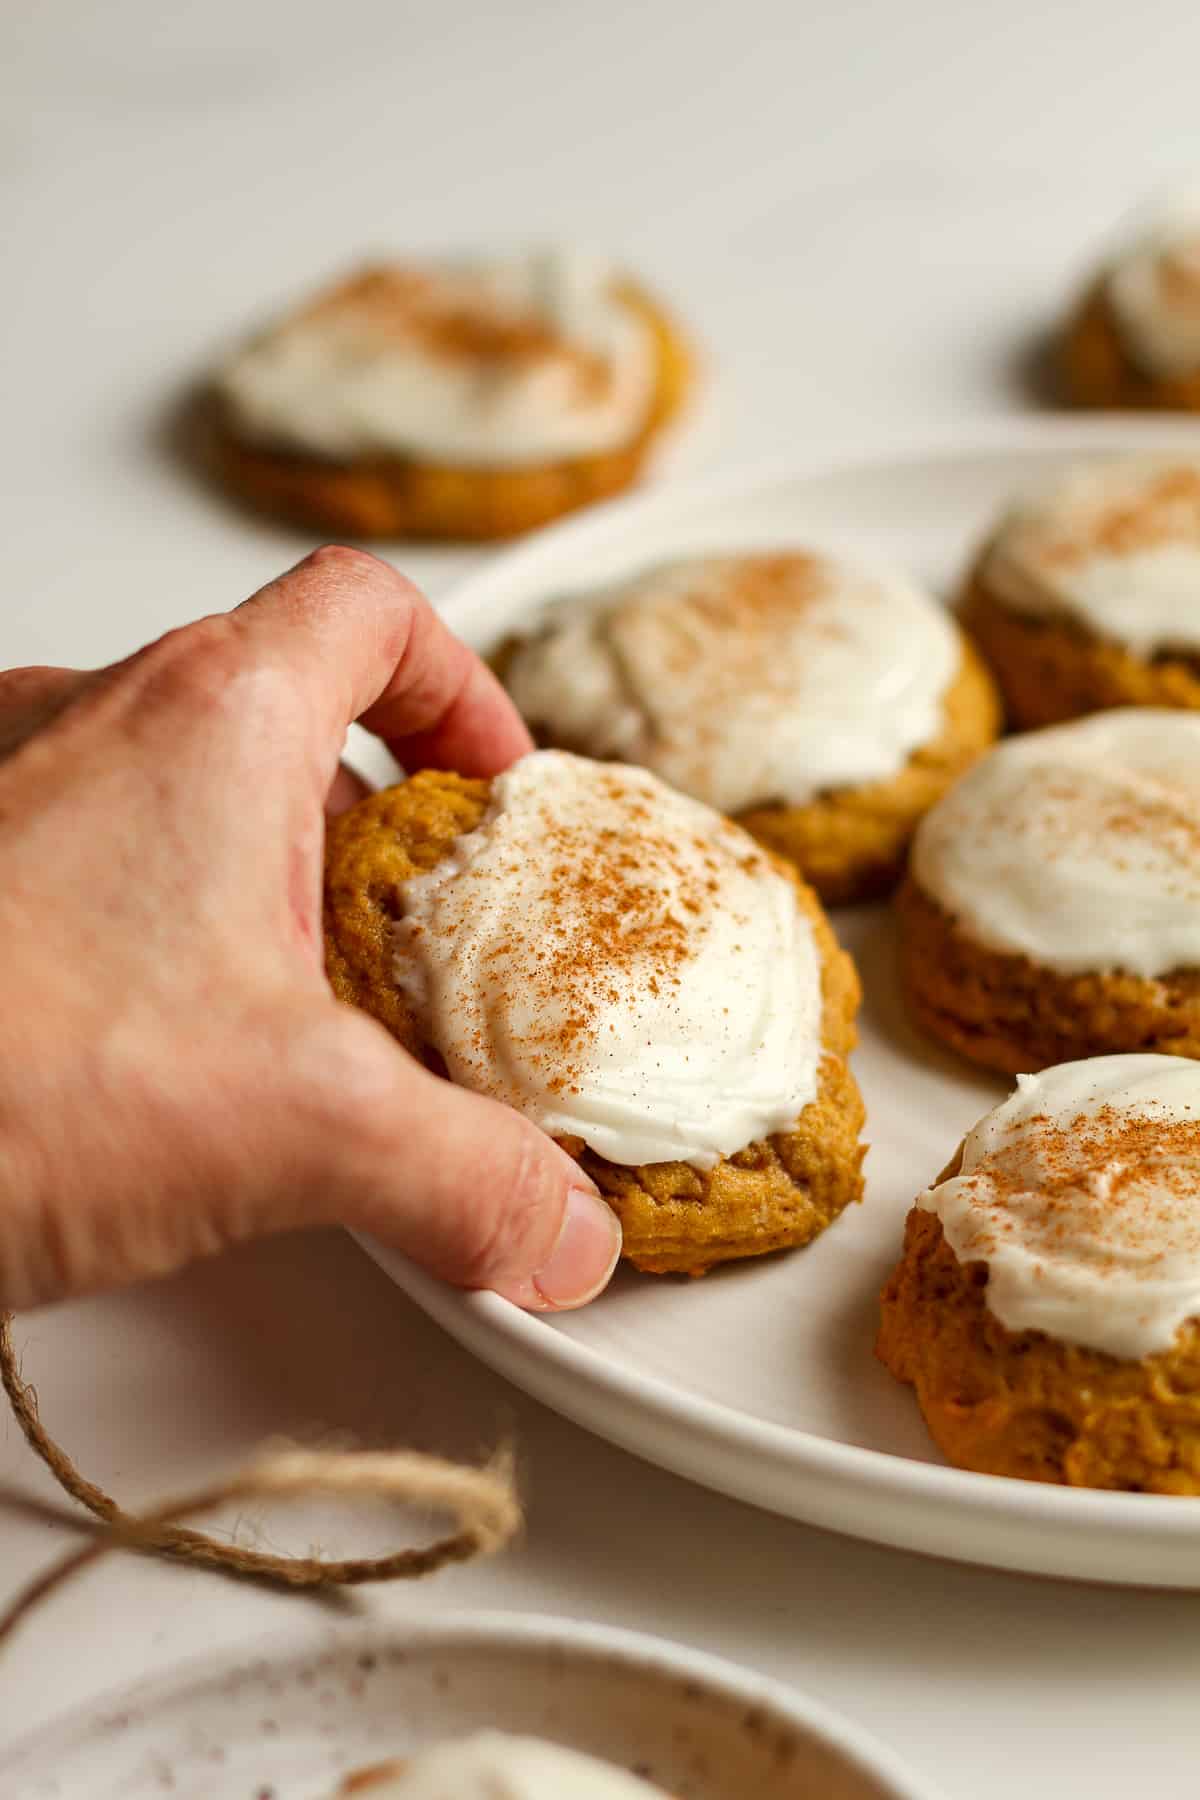 A hand picking up an iced pumpkin cookie from a plate.